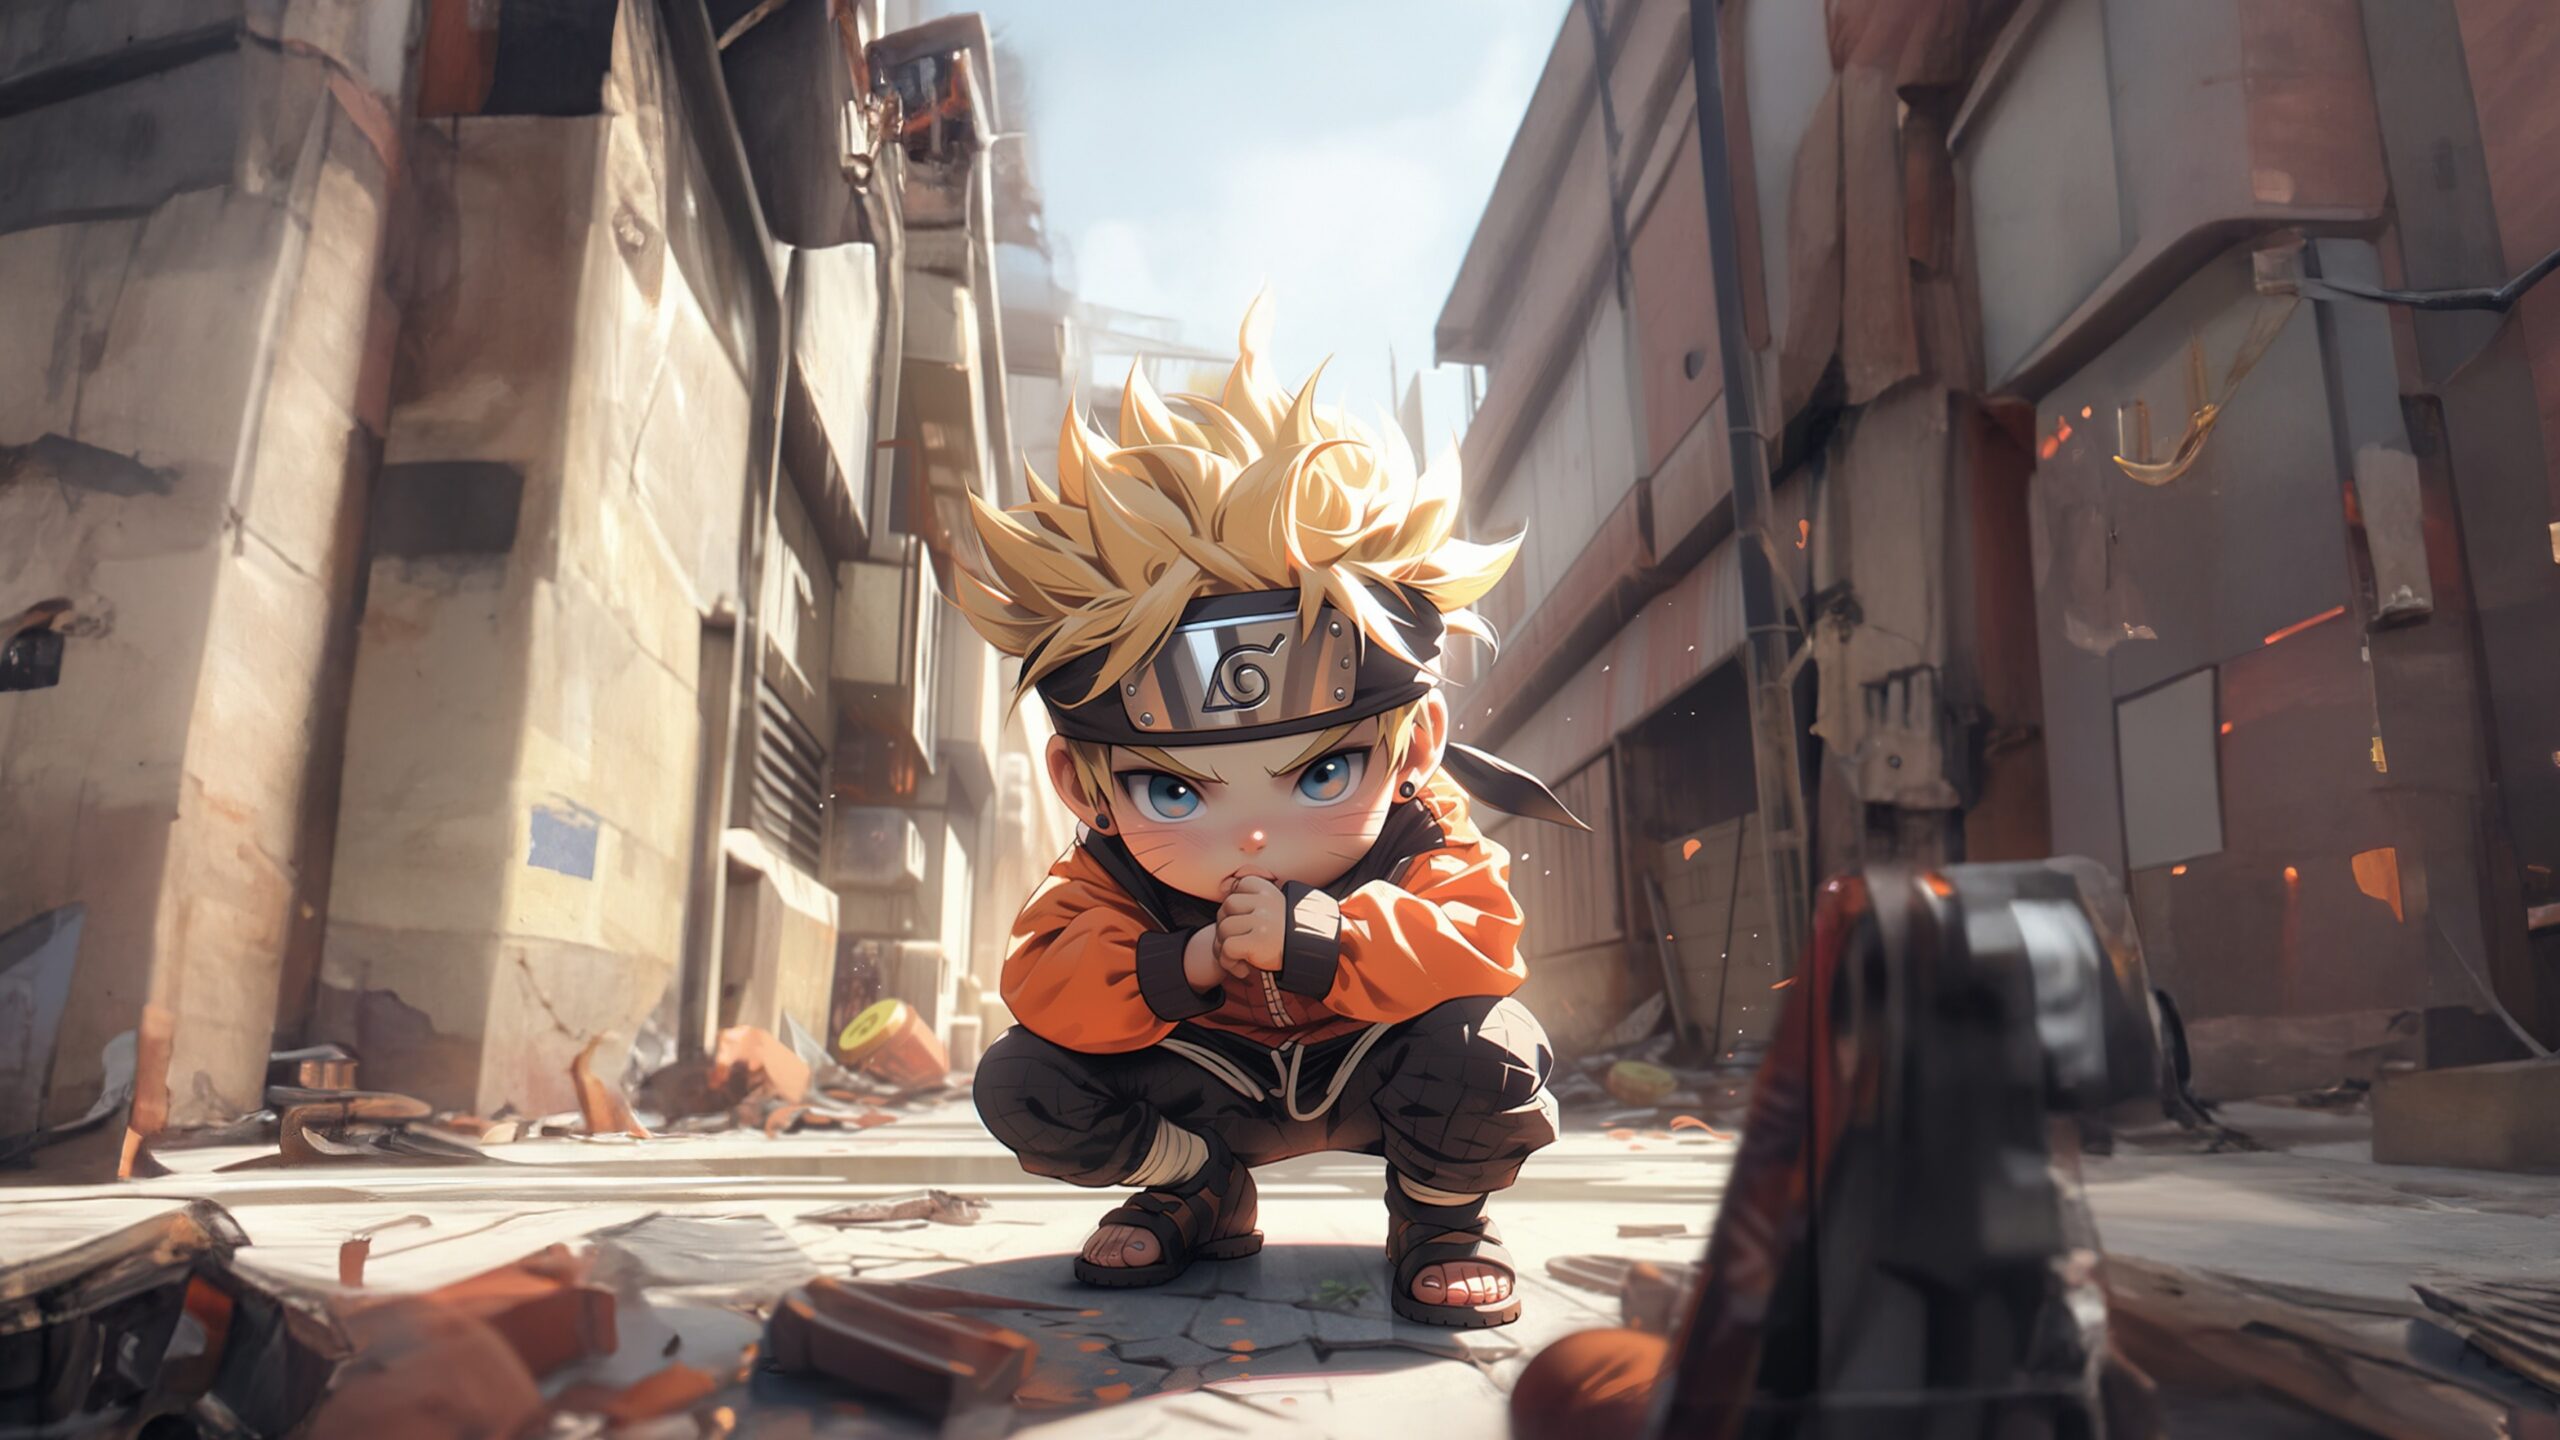 Naruto 4k Wallpaper For PC scaled 1